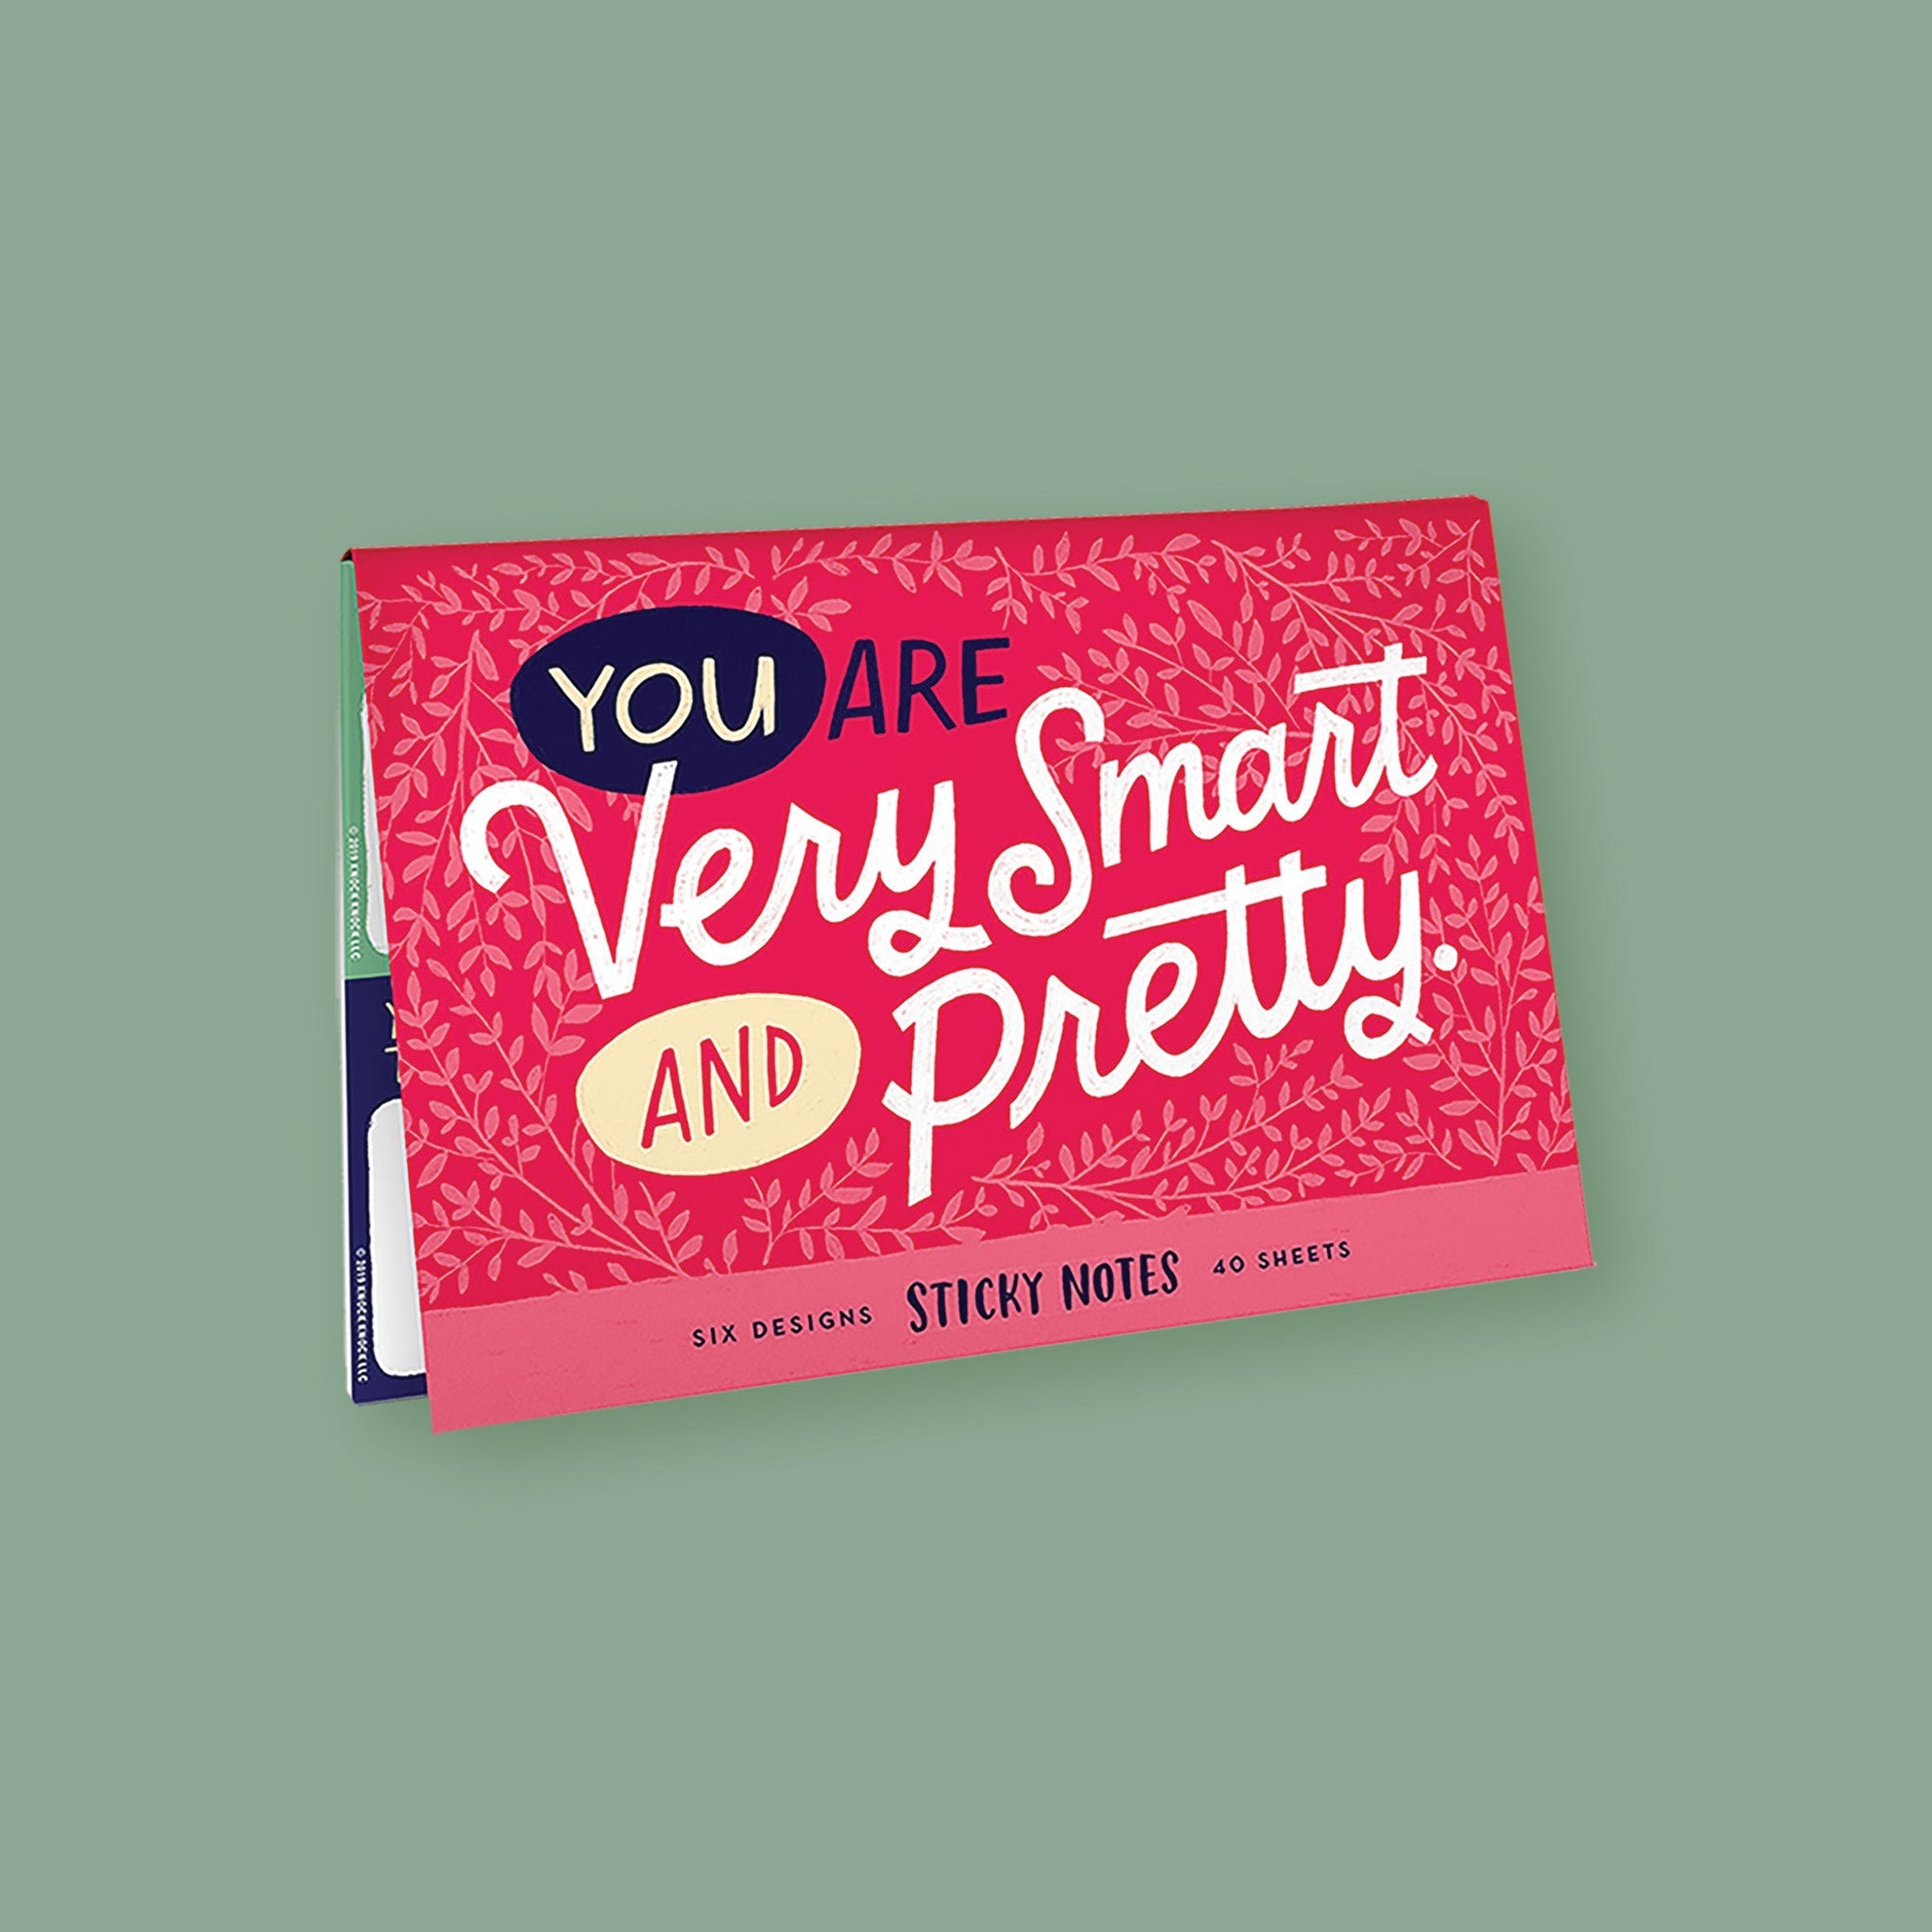 On a moss green background sits a packet. This is a close-up of a cherry pink packet of sticky notes that has light pink illustrations of branches with leaves. It says "YOU ARE Very Smart AND Pretty" in handwritten lettering. The colors of the lettering are navy, light yellow, and white. On the bottom it says "SIX DESIGNS STICKY NOTES 40 SHEETS" in navy, handwritten lettering.